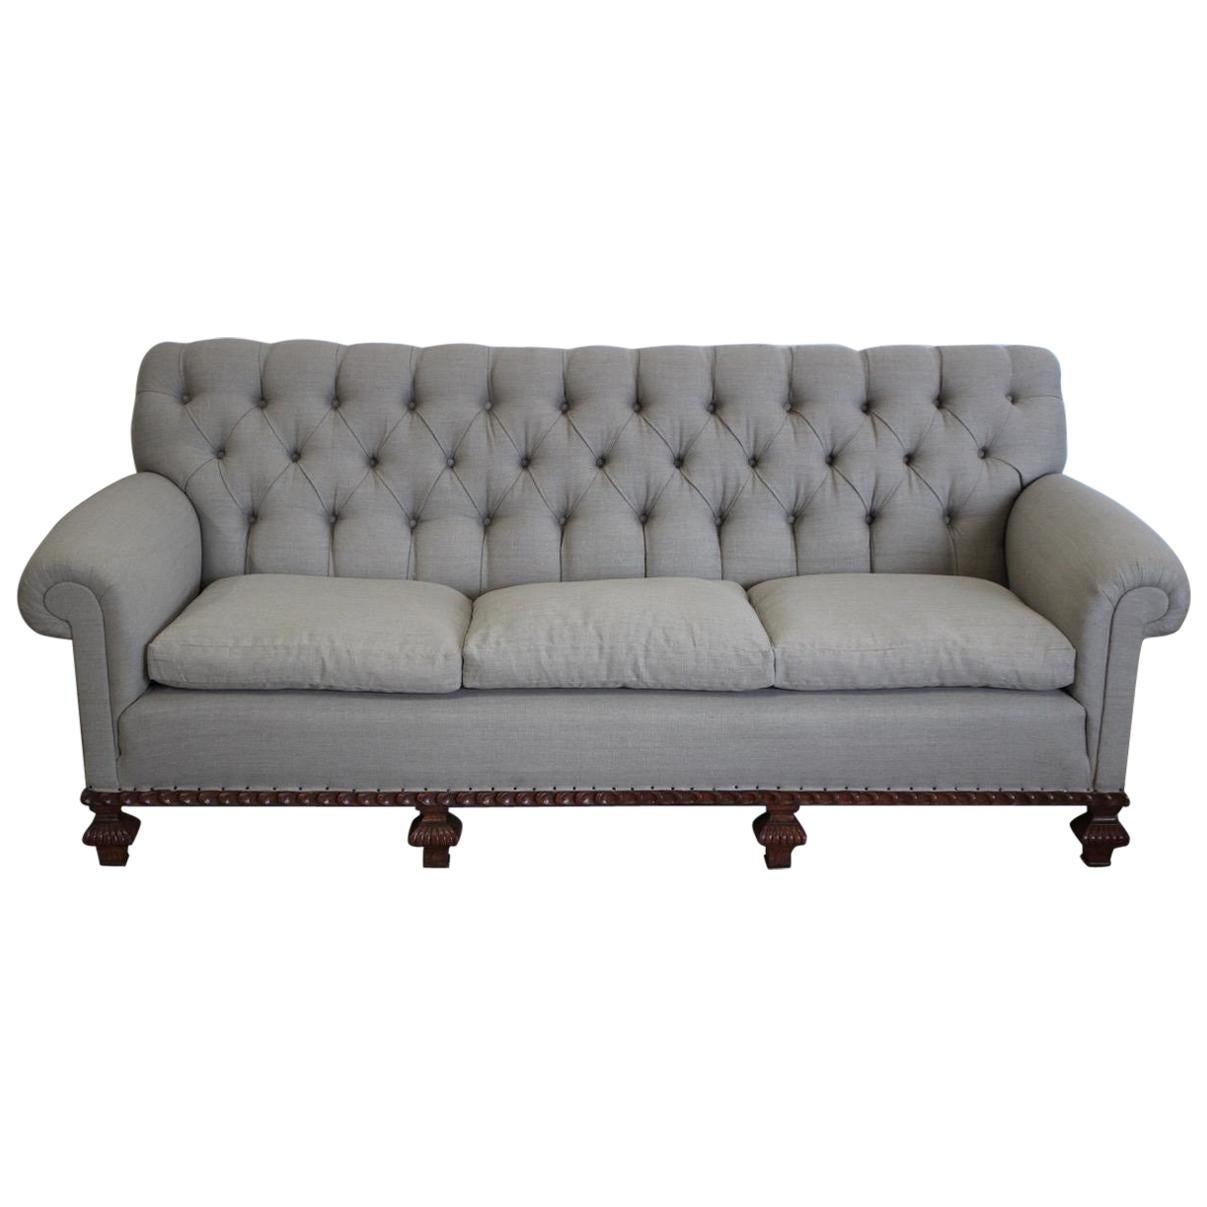 Large 19th Cent English Country House Sofa For Sale